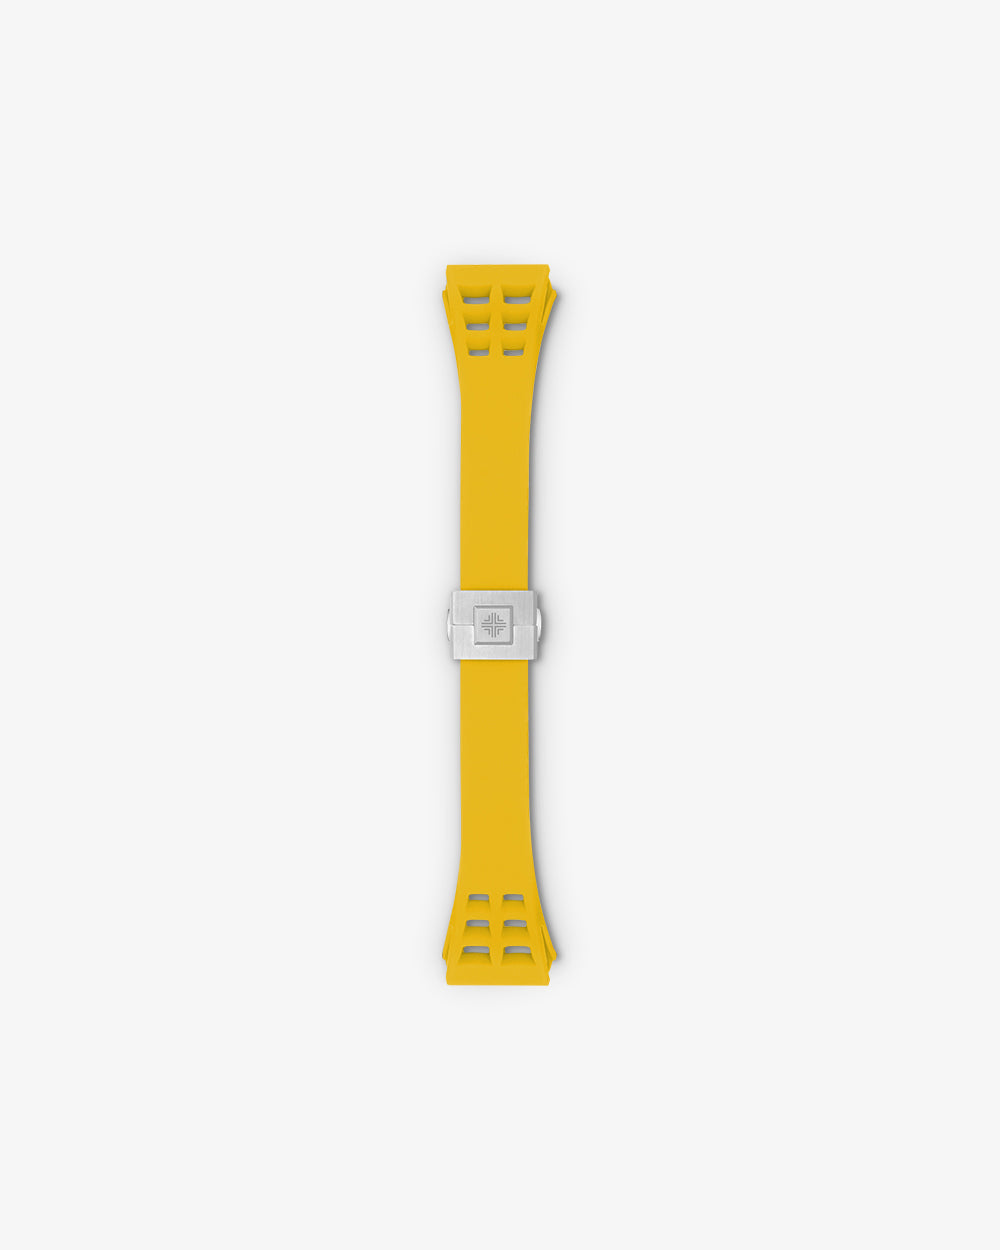 Swiss Concept Racing Elite Edition Strap (Modena Yellow & Stainless Steel)